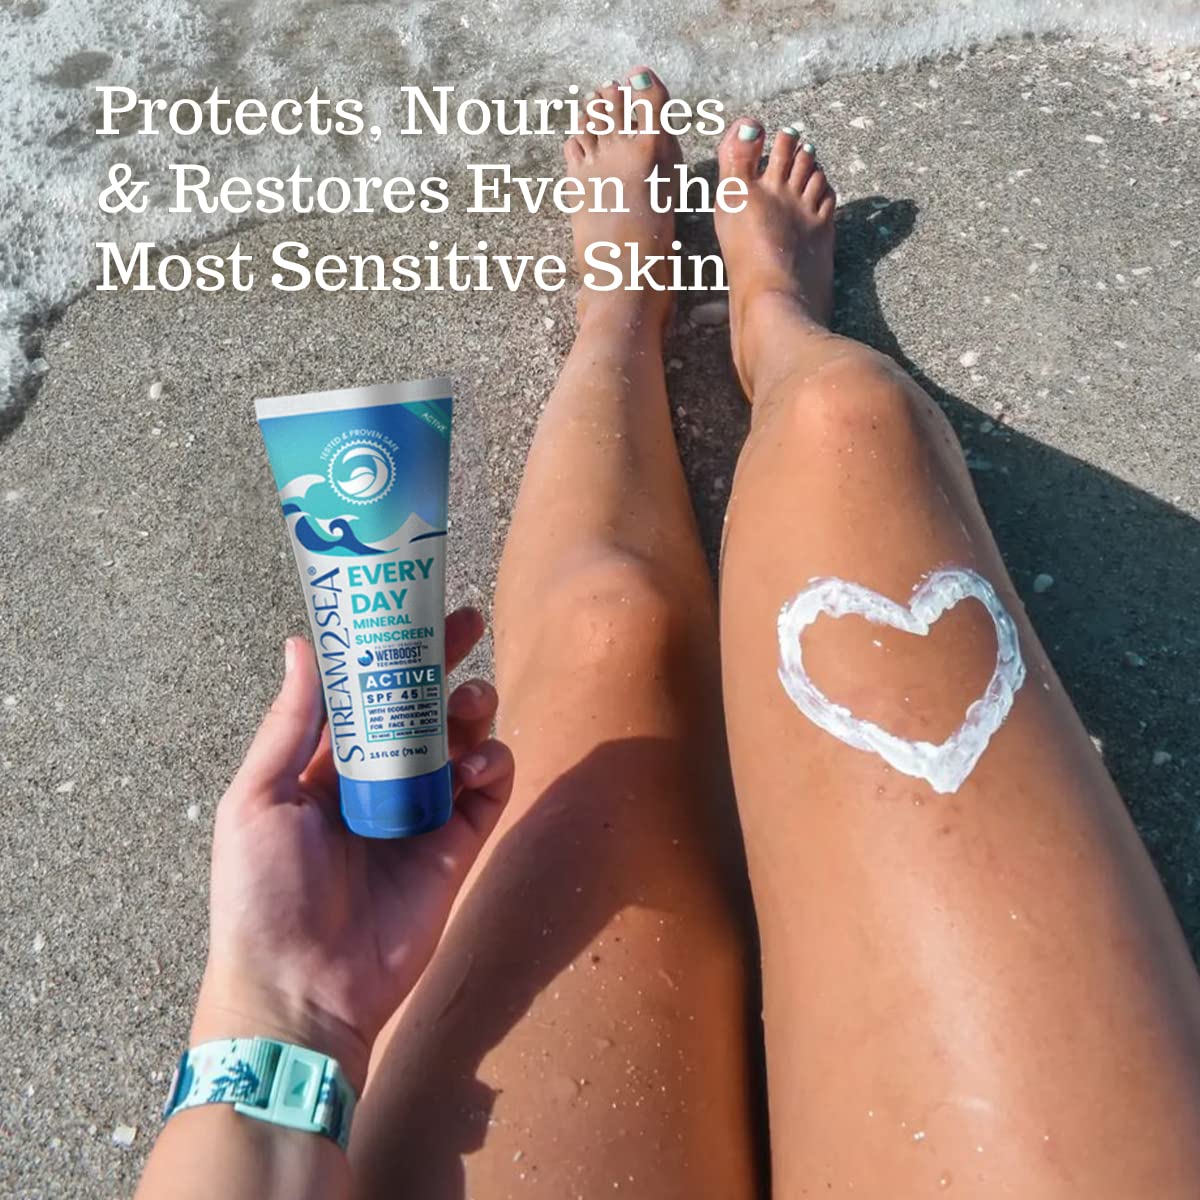 SPF 45 Every Day Active Mineral Sunscreen | 2.5 Fl Oz Biodegradable & Reef Safe Sunscreen for Face & Body | Non-Greasy, Lightweight & Sheer Mineral Protection Against UVA & UVB by Stream2Sea : Beauty & Personal Care